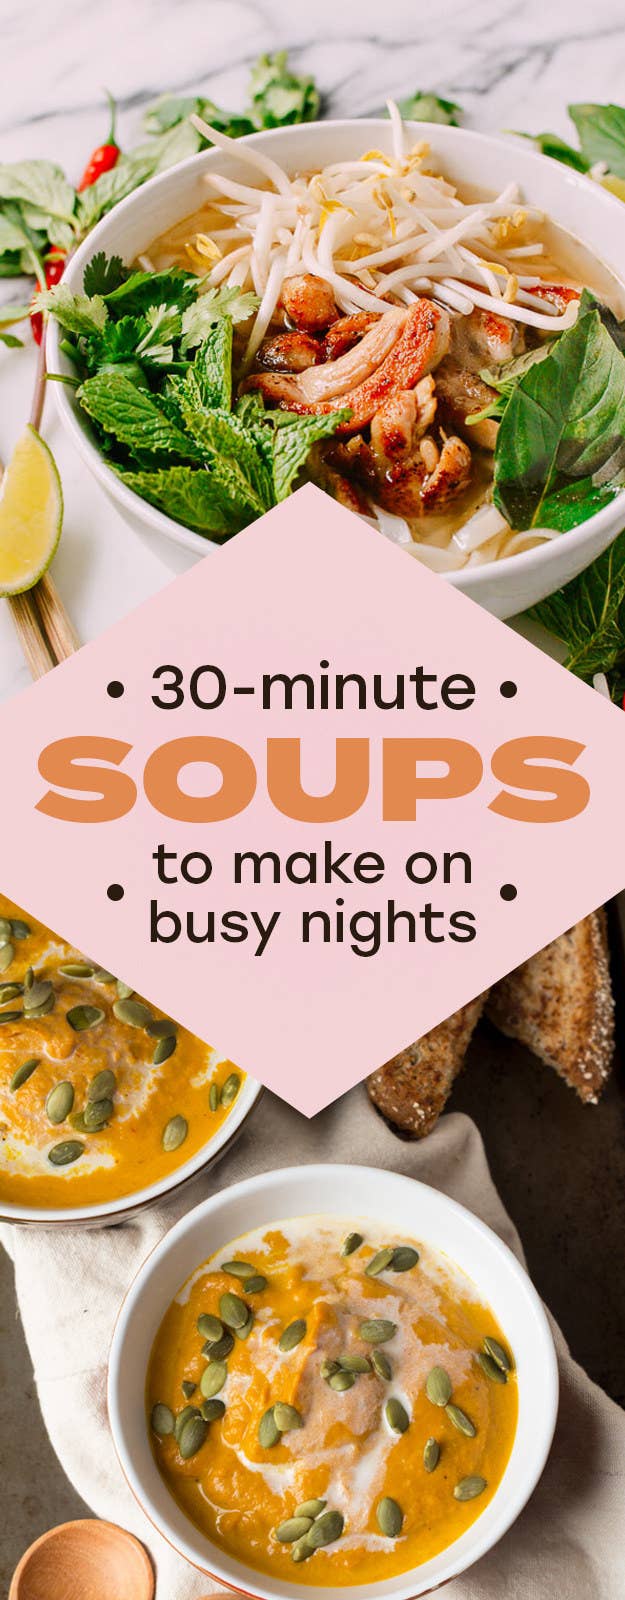 15 Best Quick and Cozy Soup Recipes - Damn Delicious